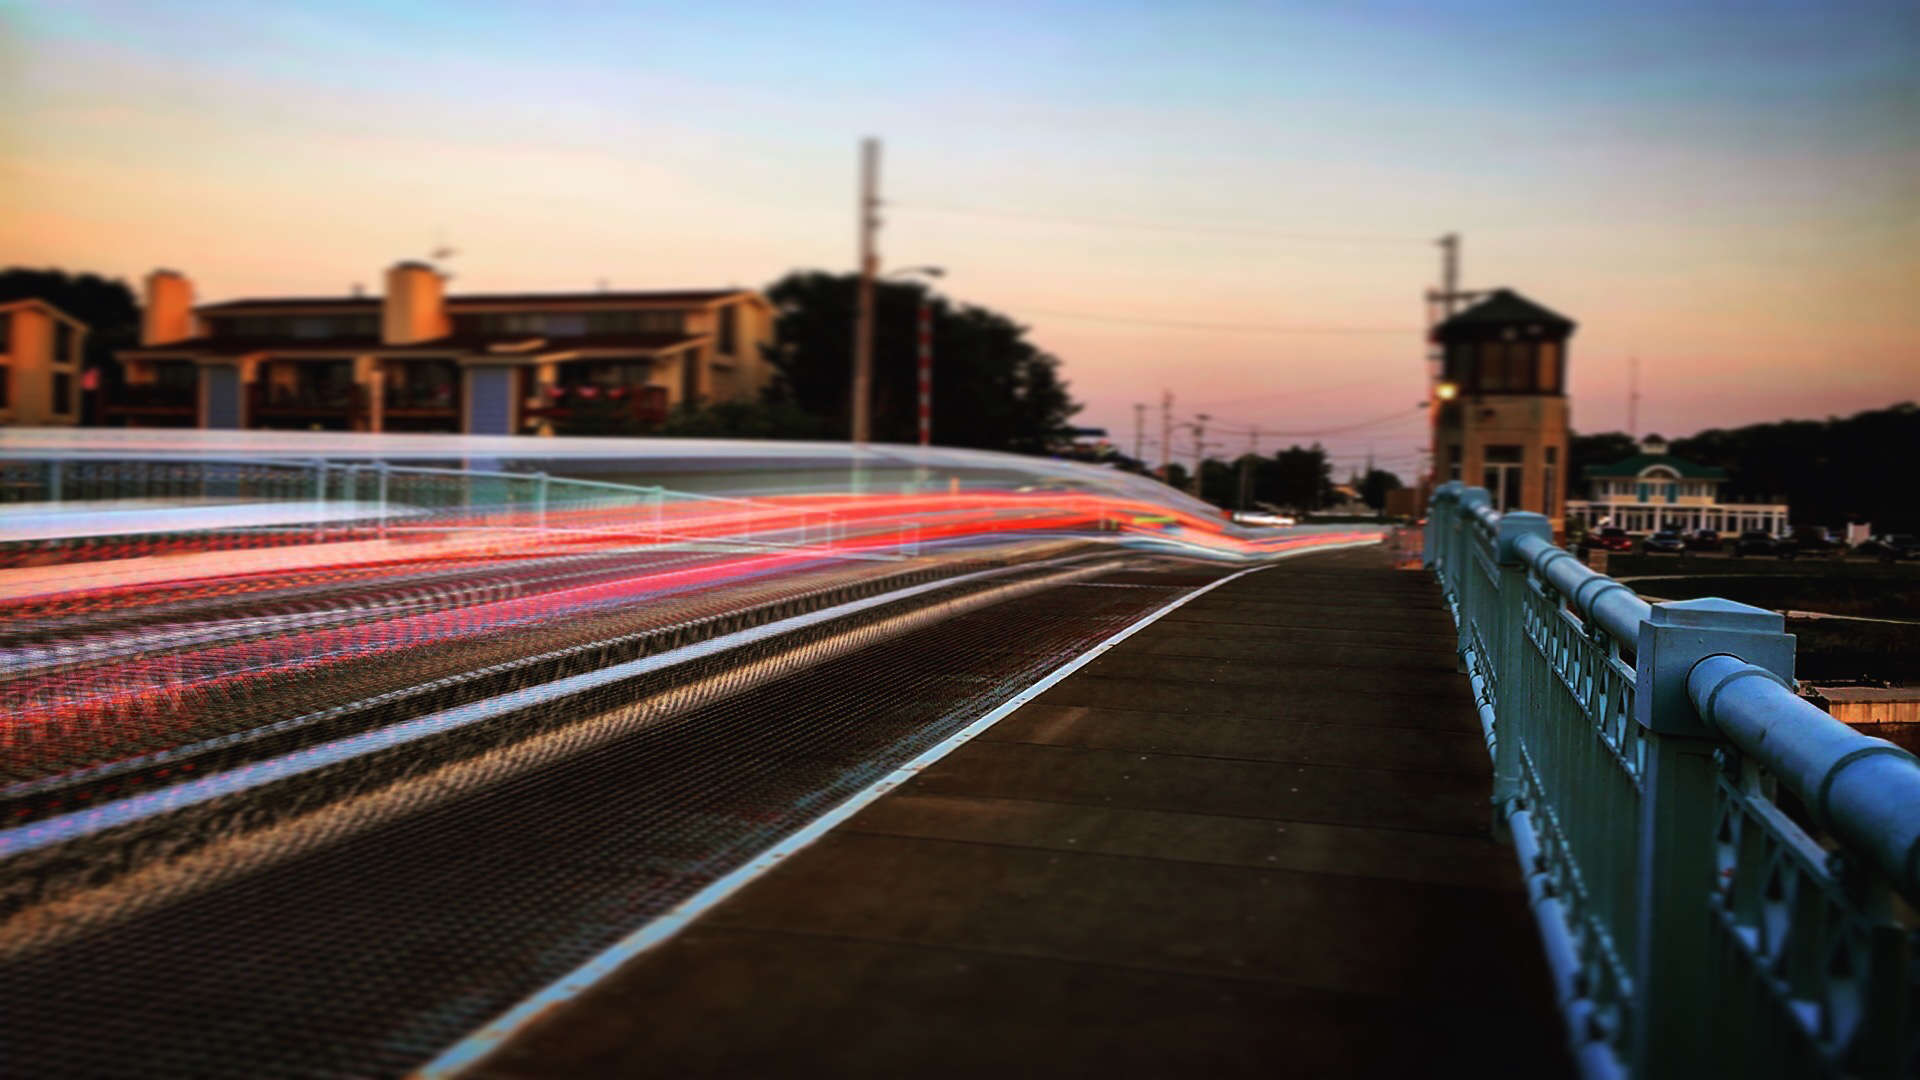 A decent tripod and a few great apps can help you capture stunning light trails, motion blur, and low light photos.